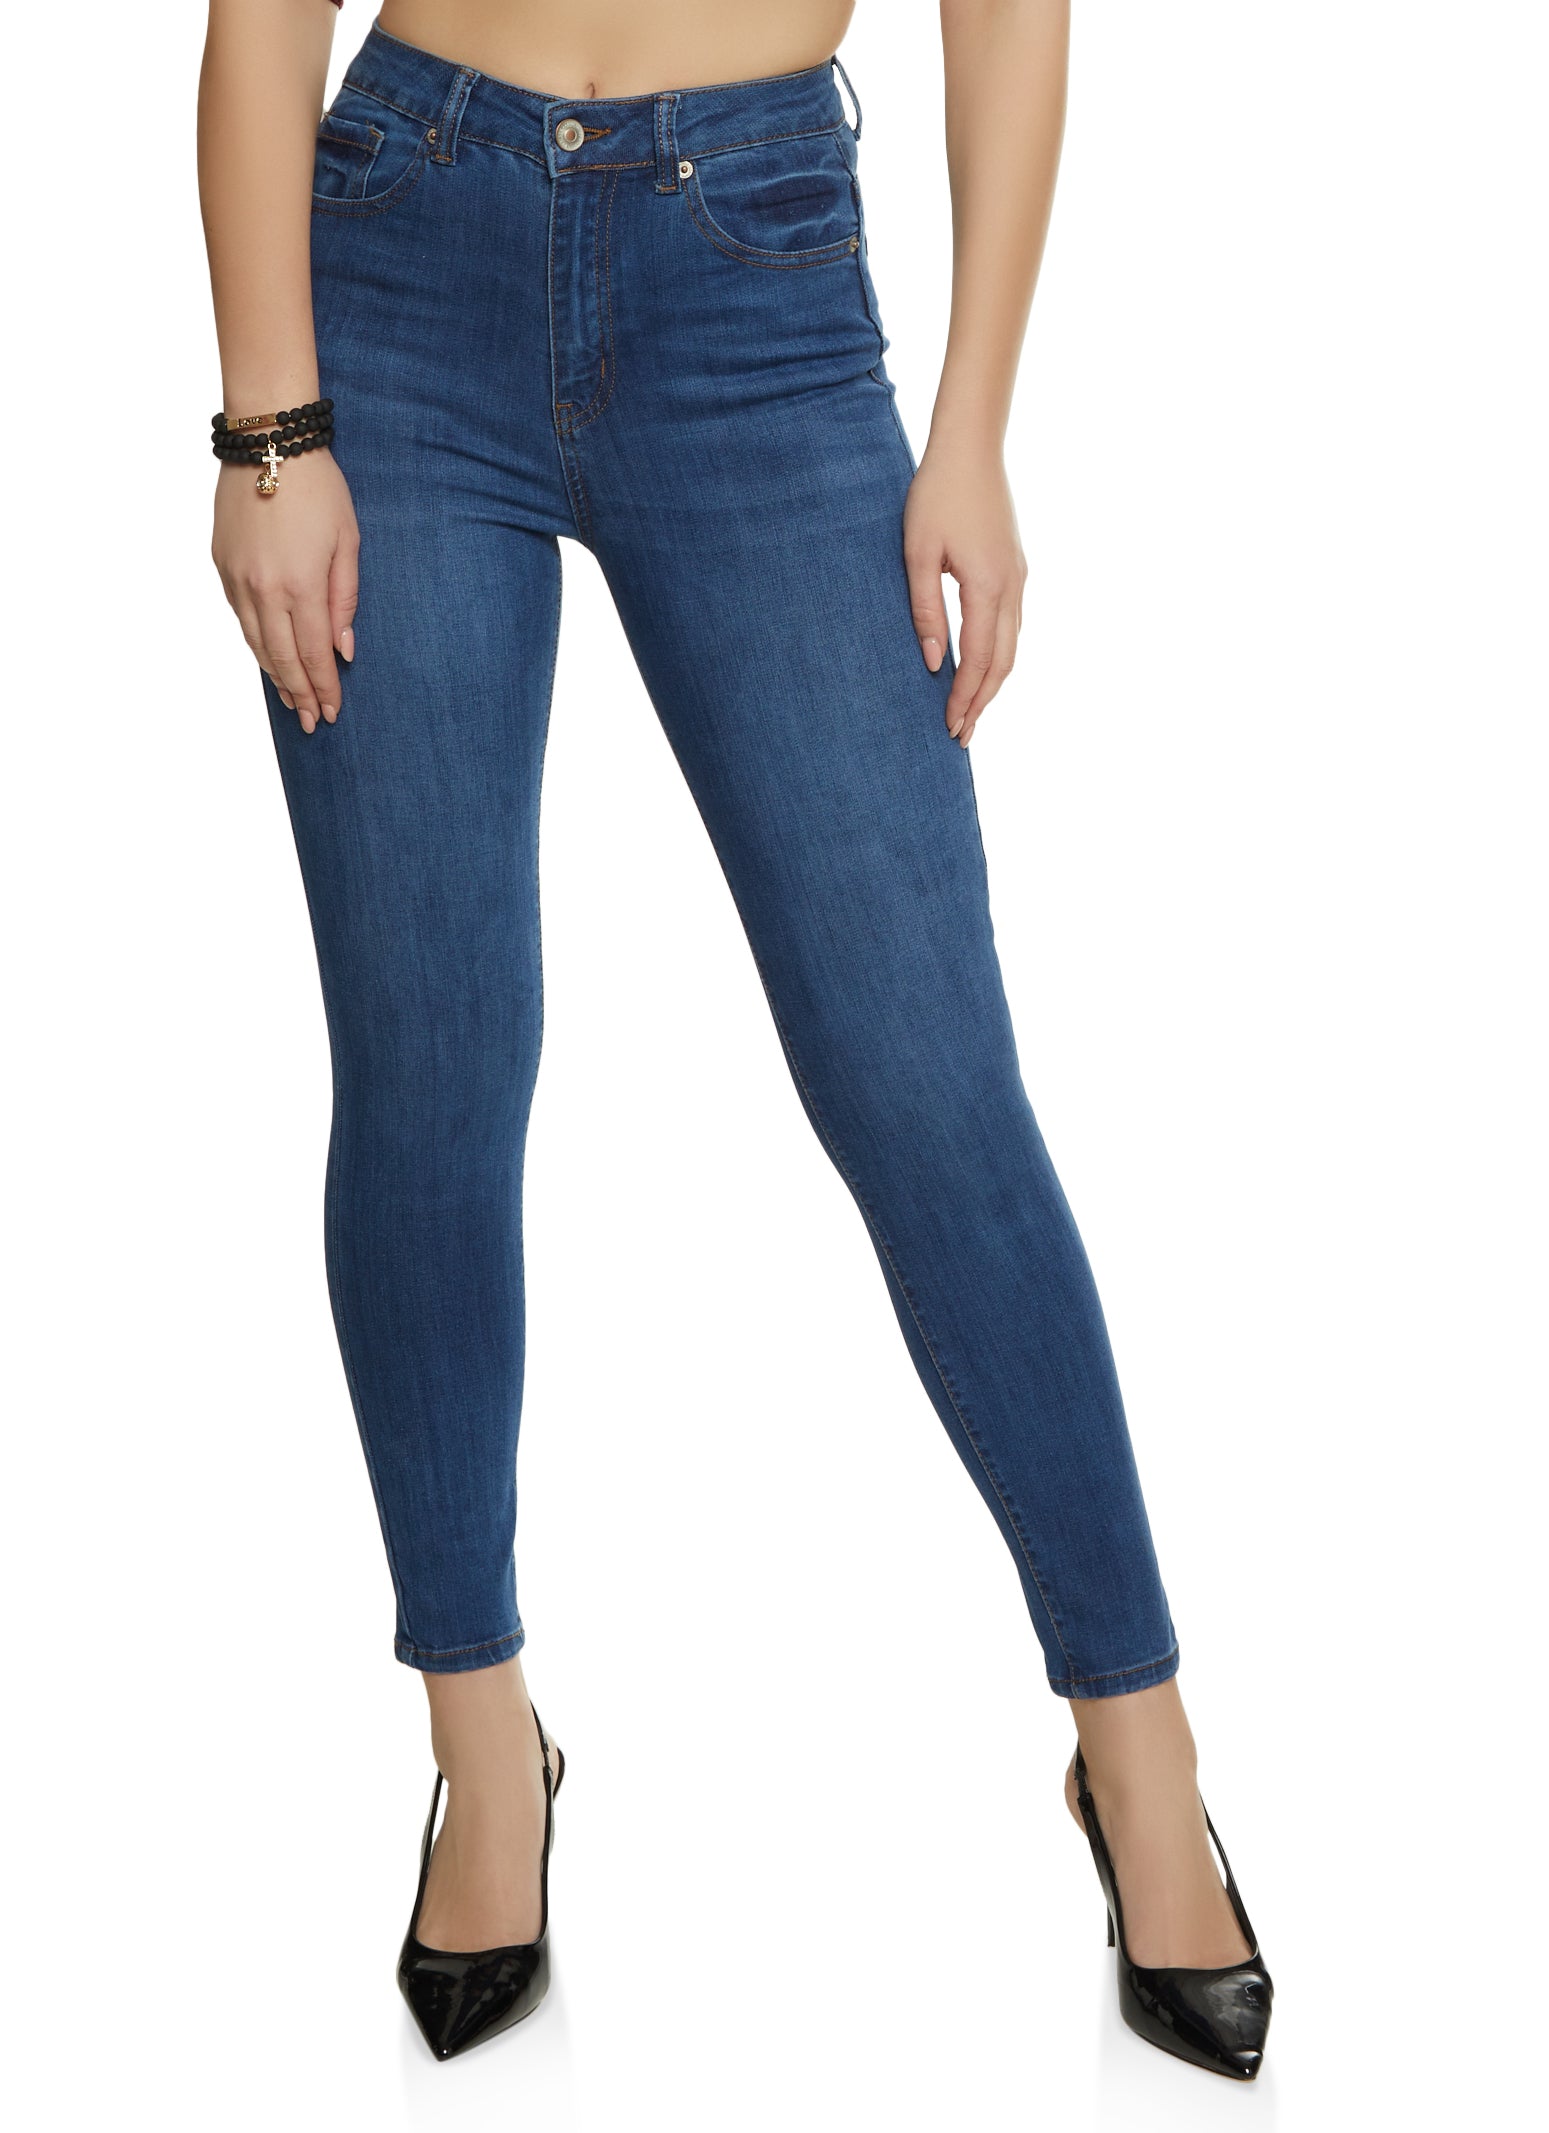 Womens WAX Whiskered High Waist Skinny Jeans, Blue, Size 5